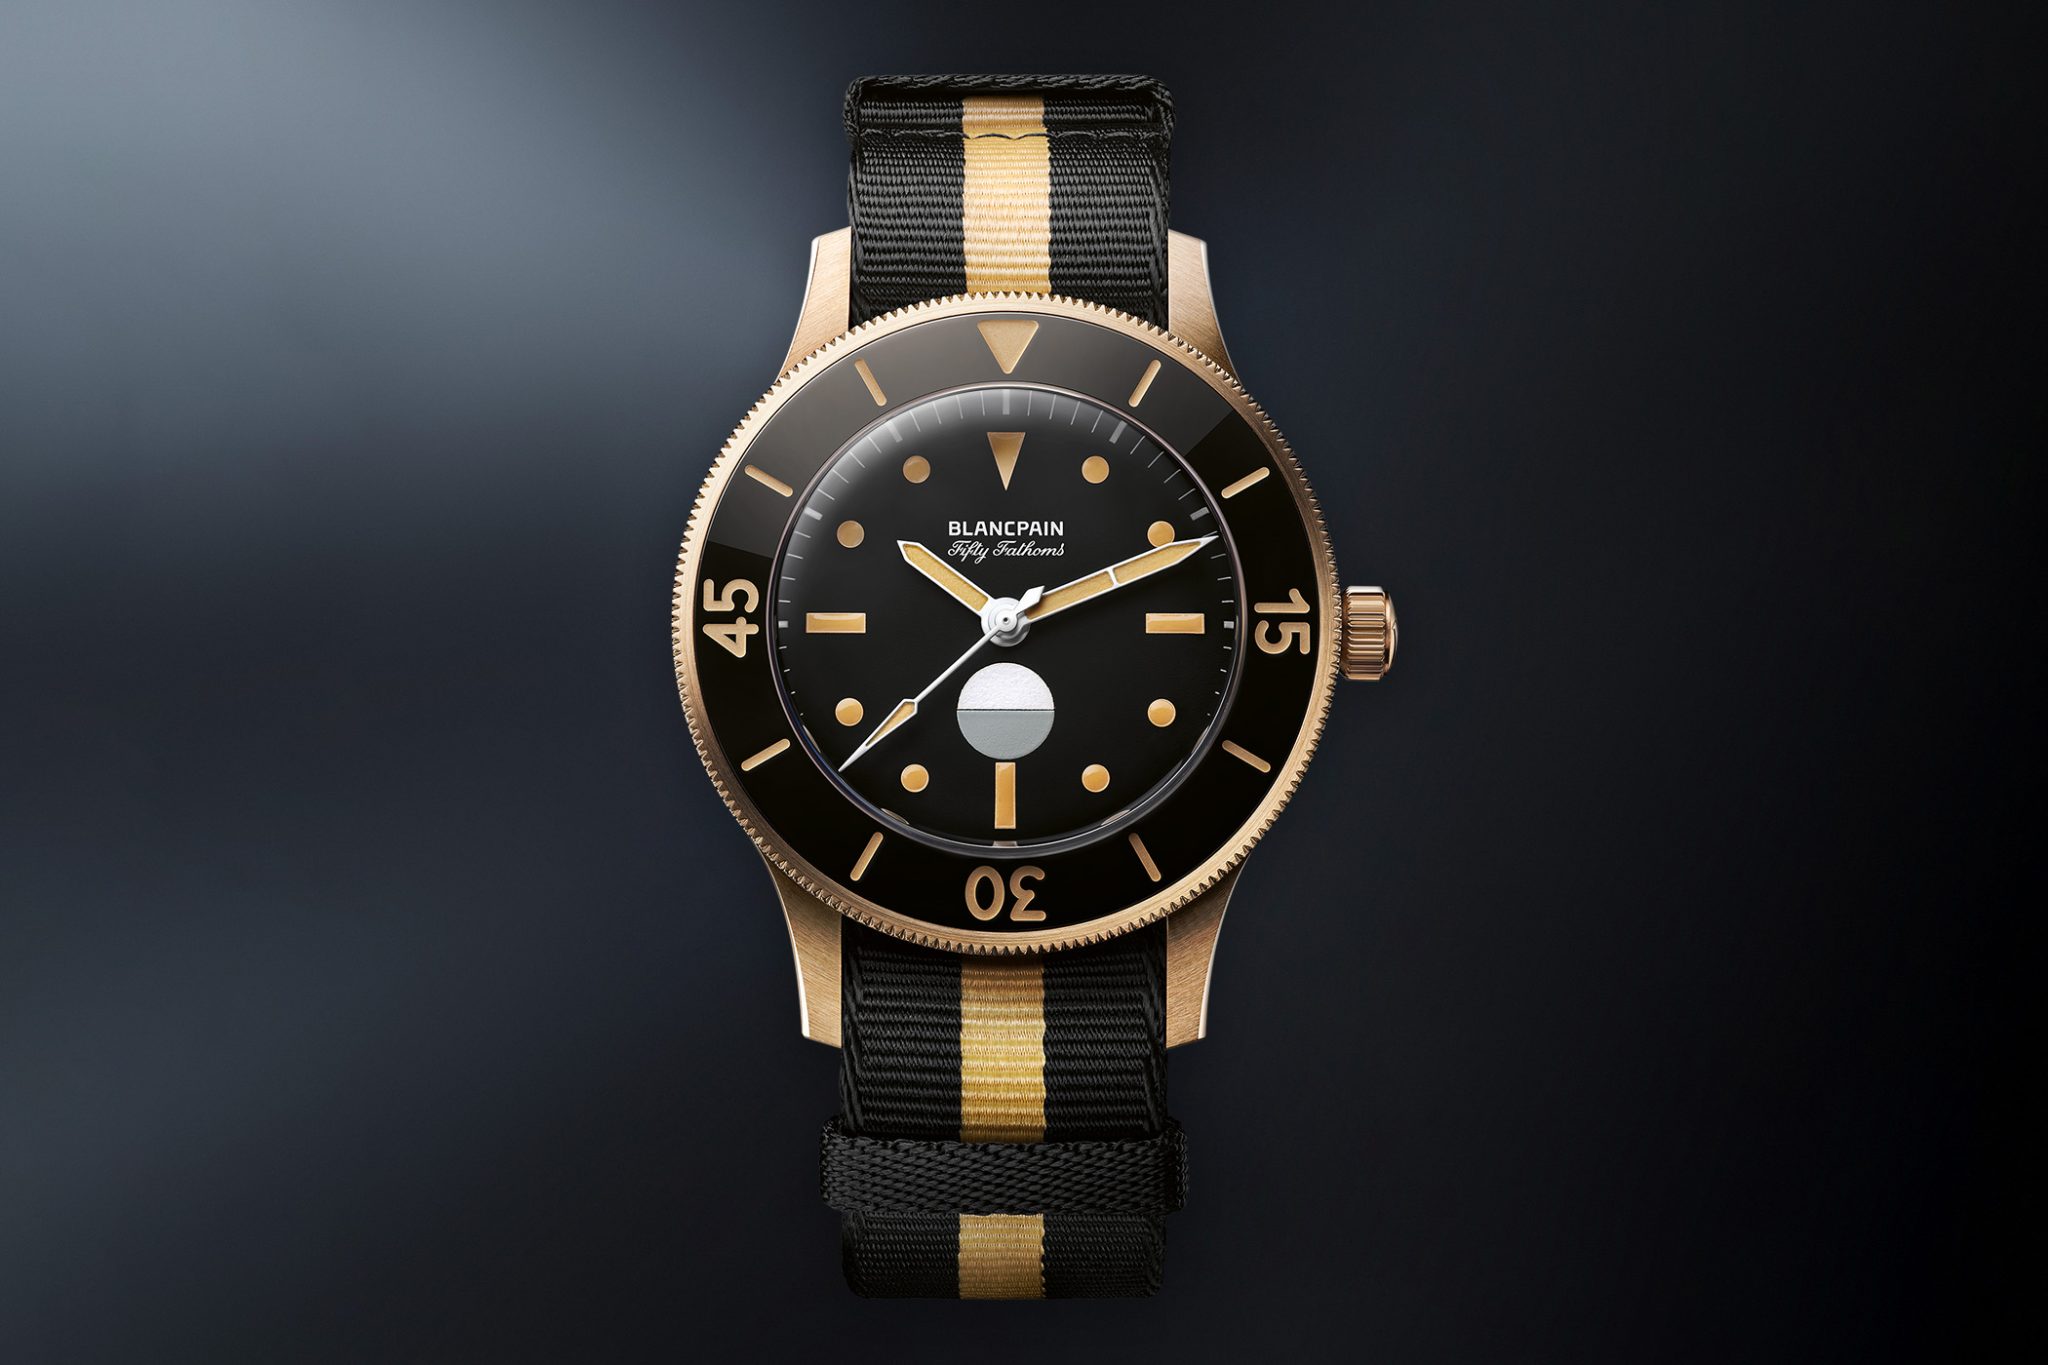 Blancpain-Fifty-Fathoms-70th-Anniversary-Act-3-Ref-5901-5630-Frontal